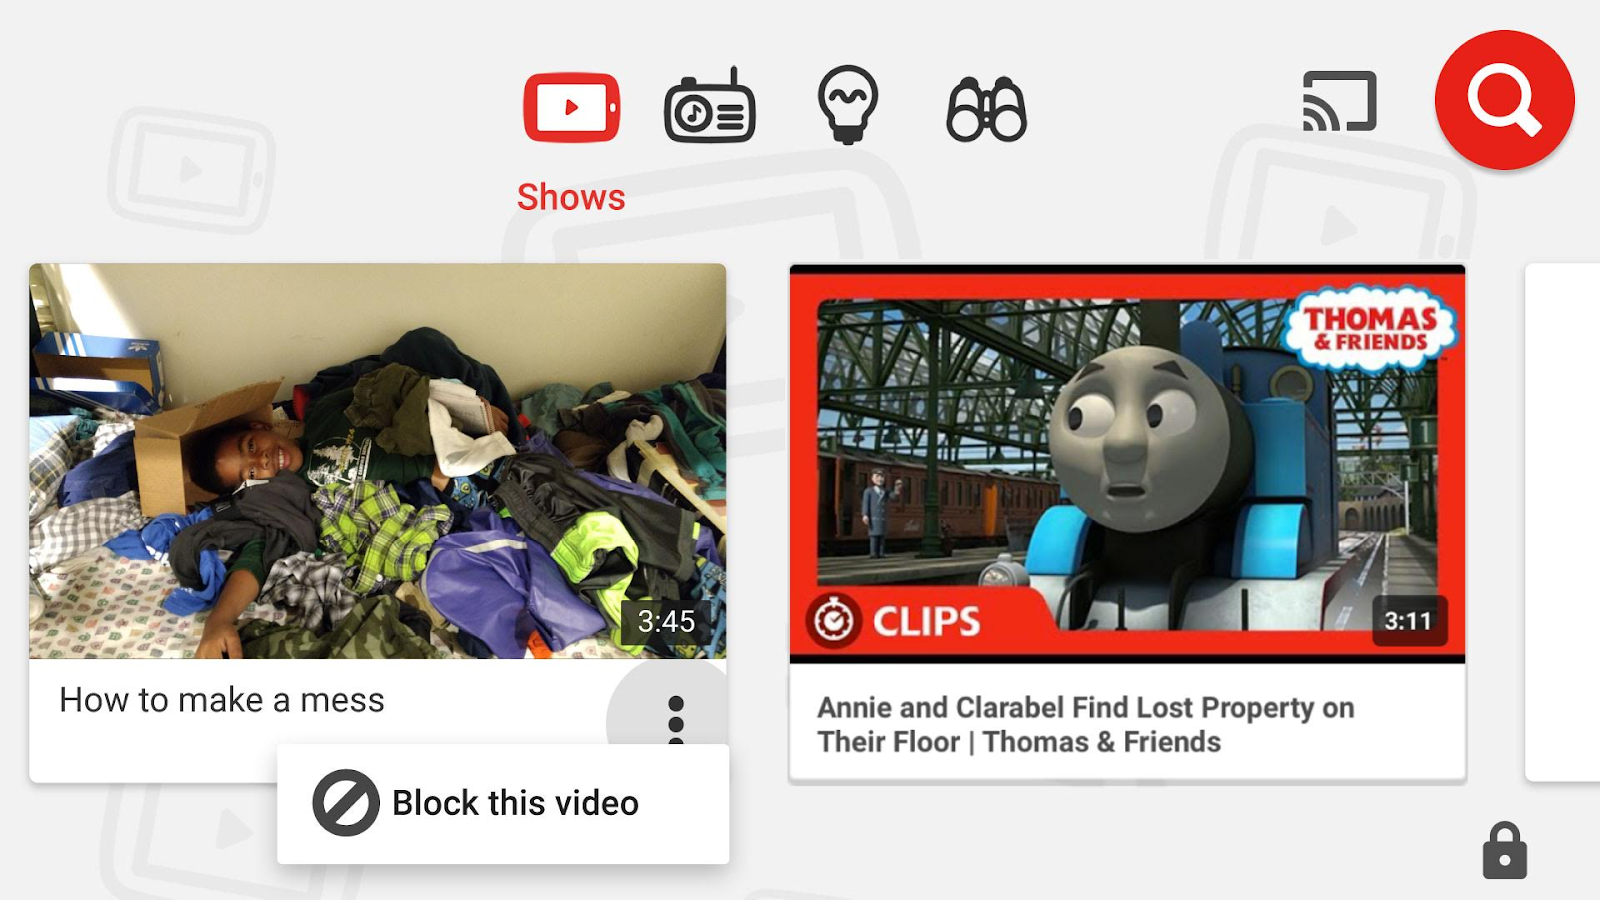 YouTube screen displaying how to block videos using the 3 dot menu next to any video or channel